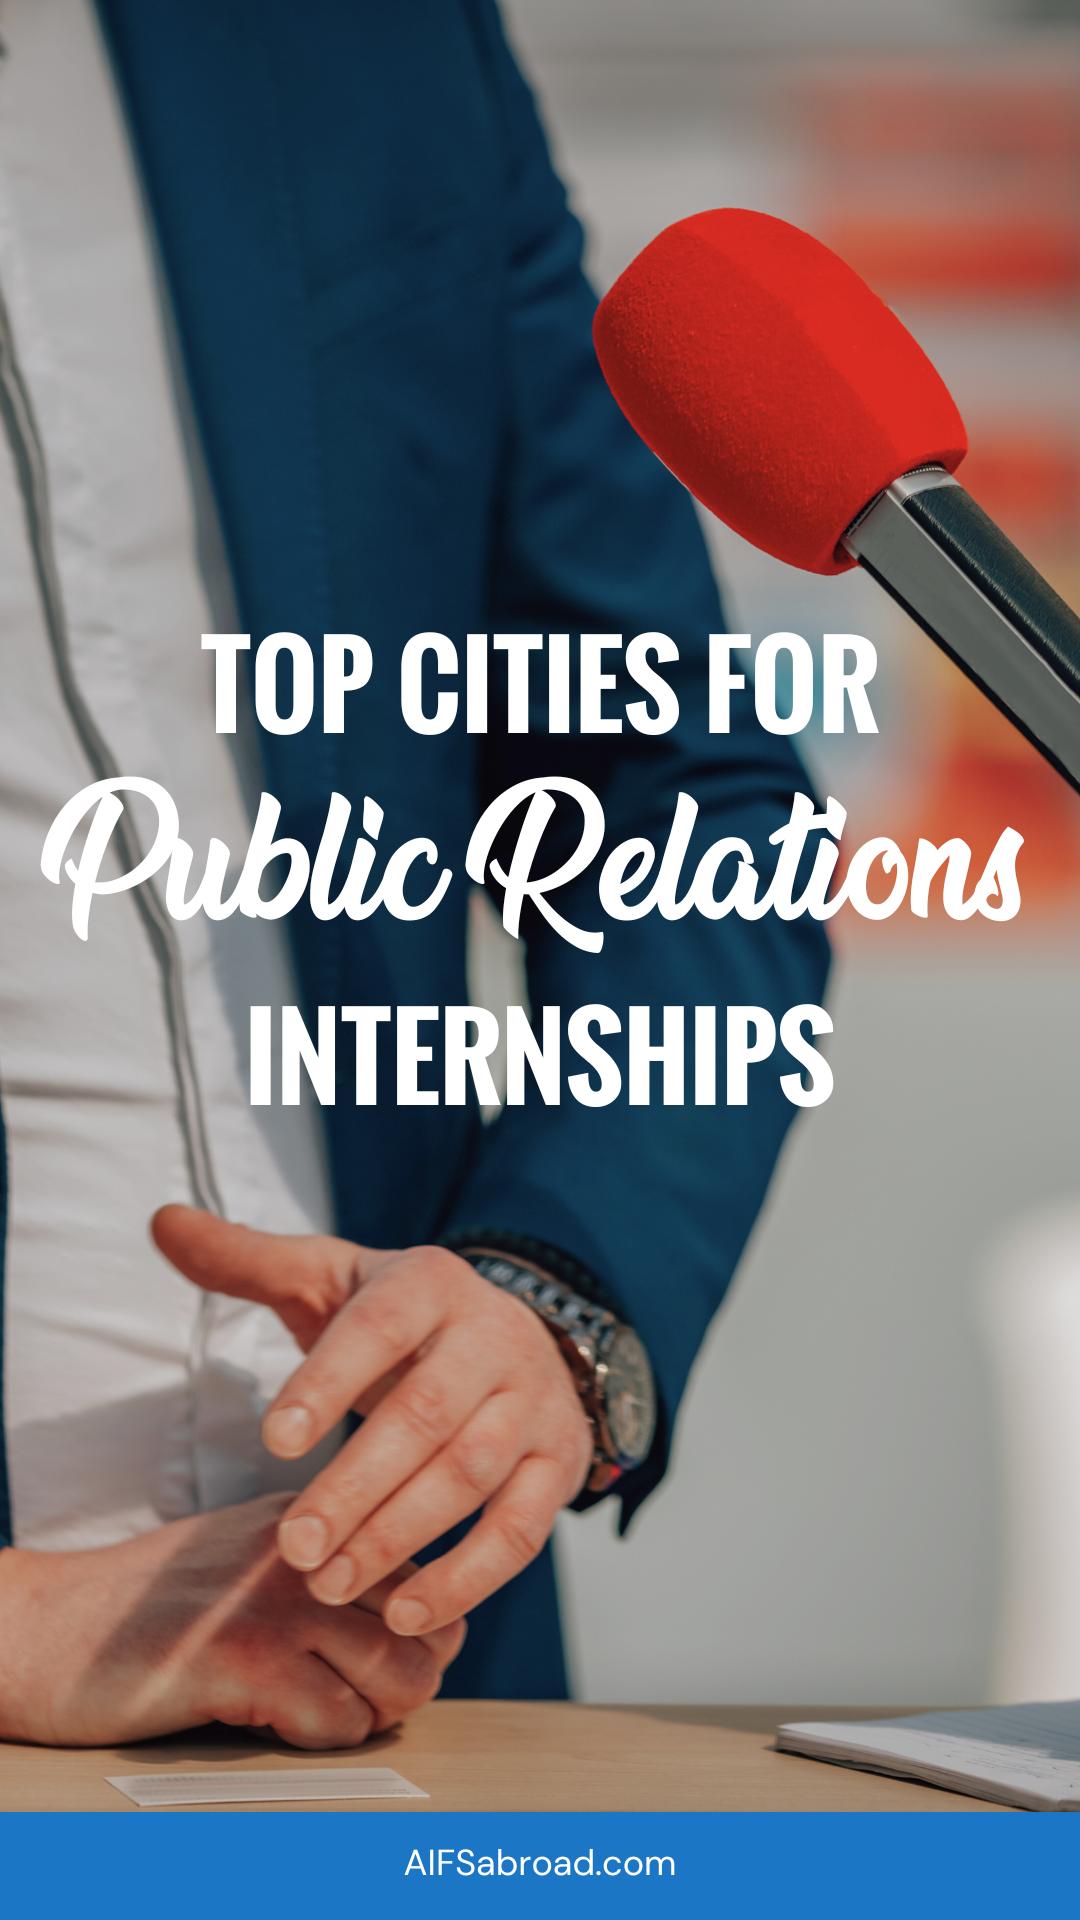 Person at Microphone - Top Cities for a Public Relations Internship - Pin Image - AIFS Abroad